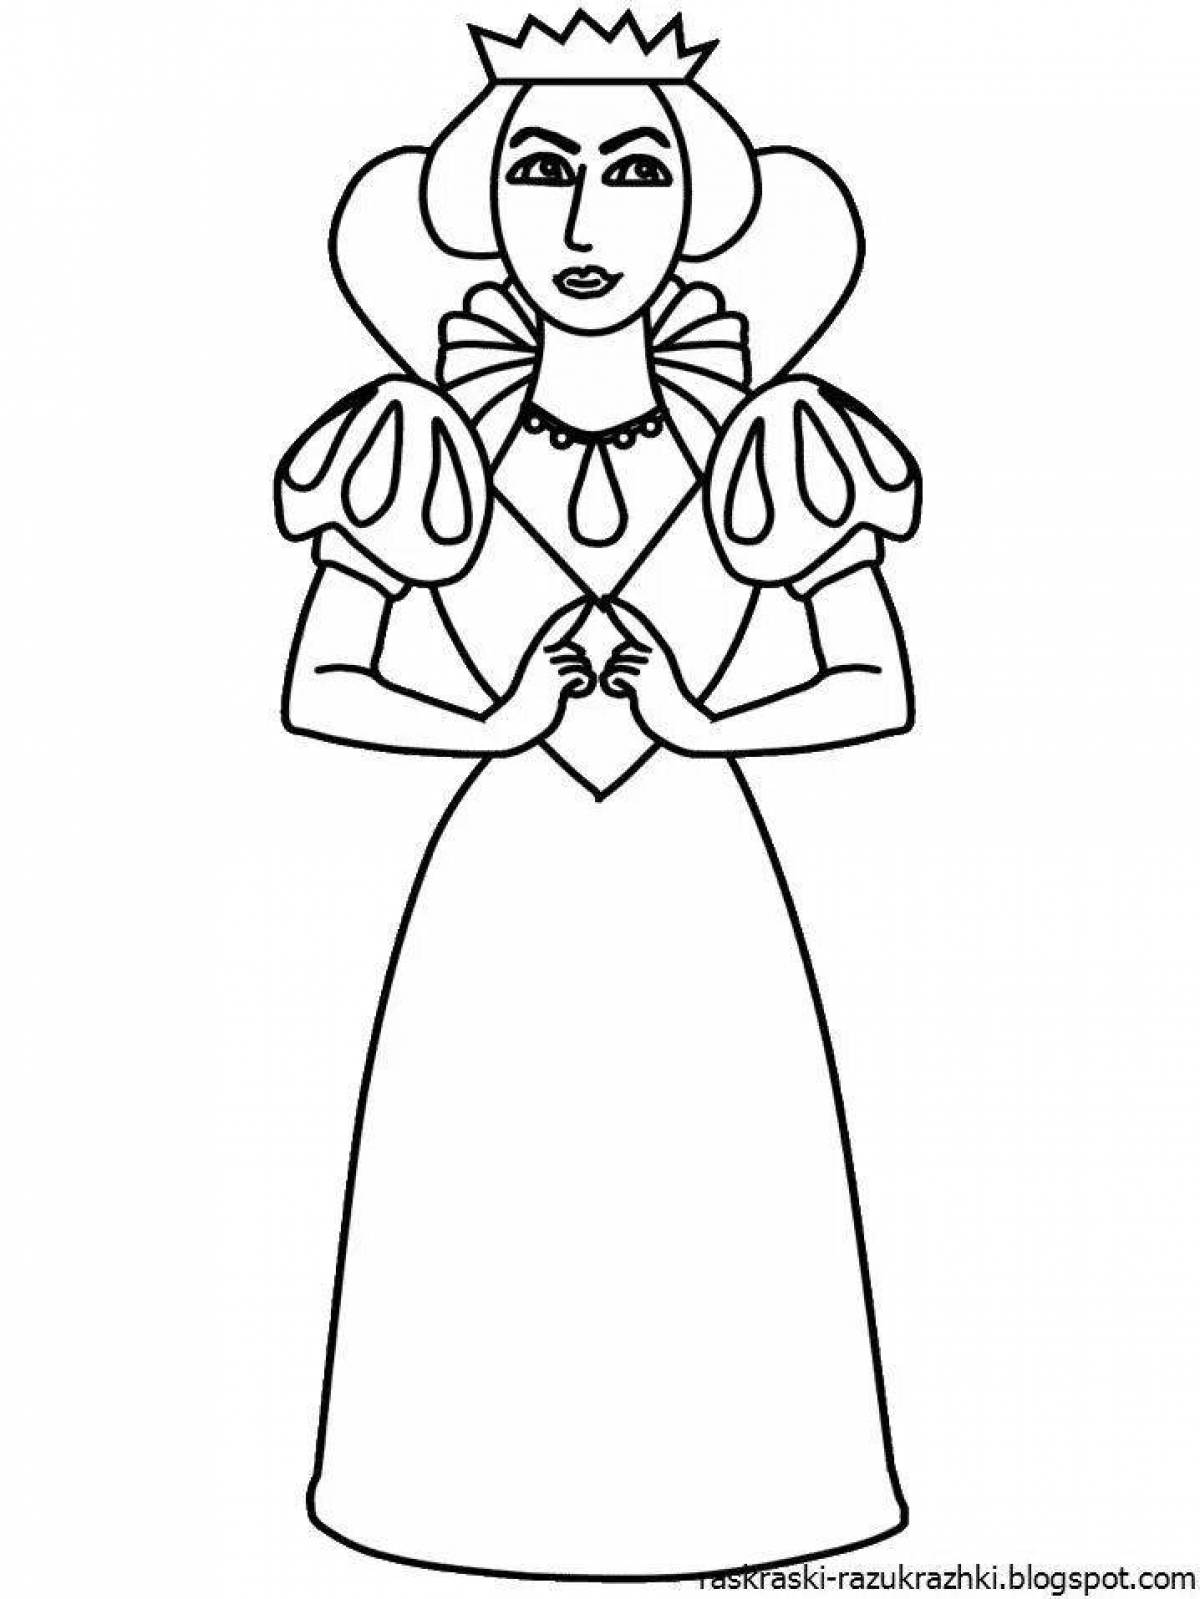 Coloring page dazzling queen for kids